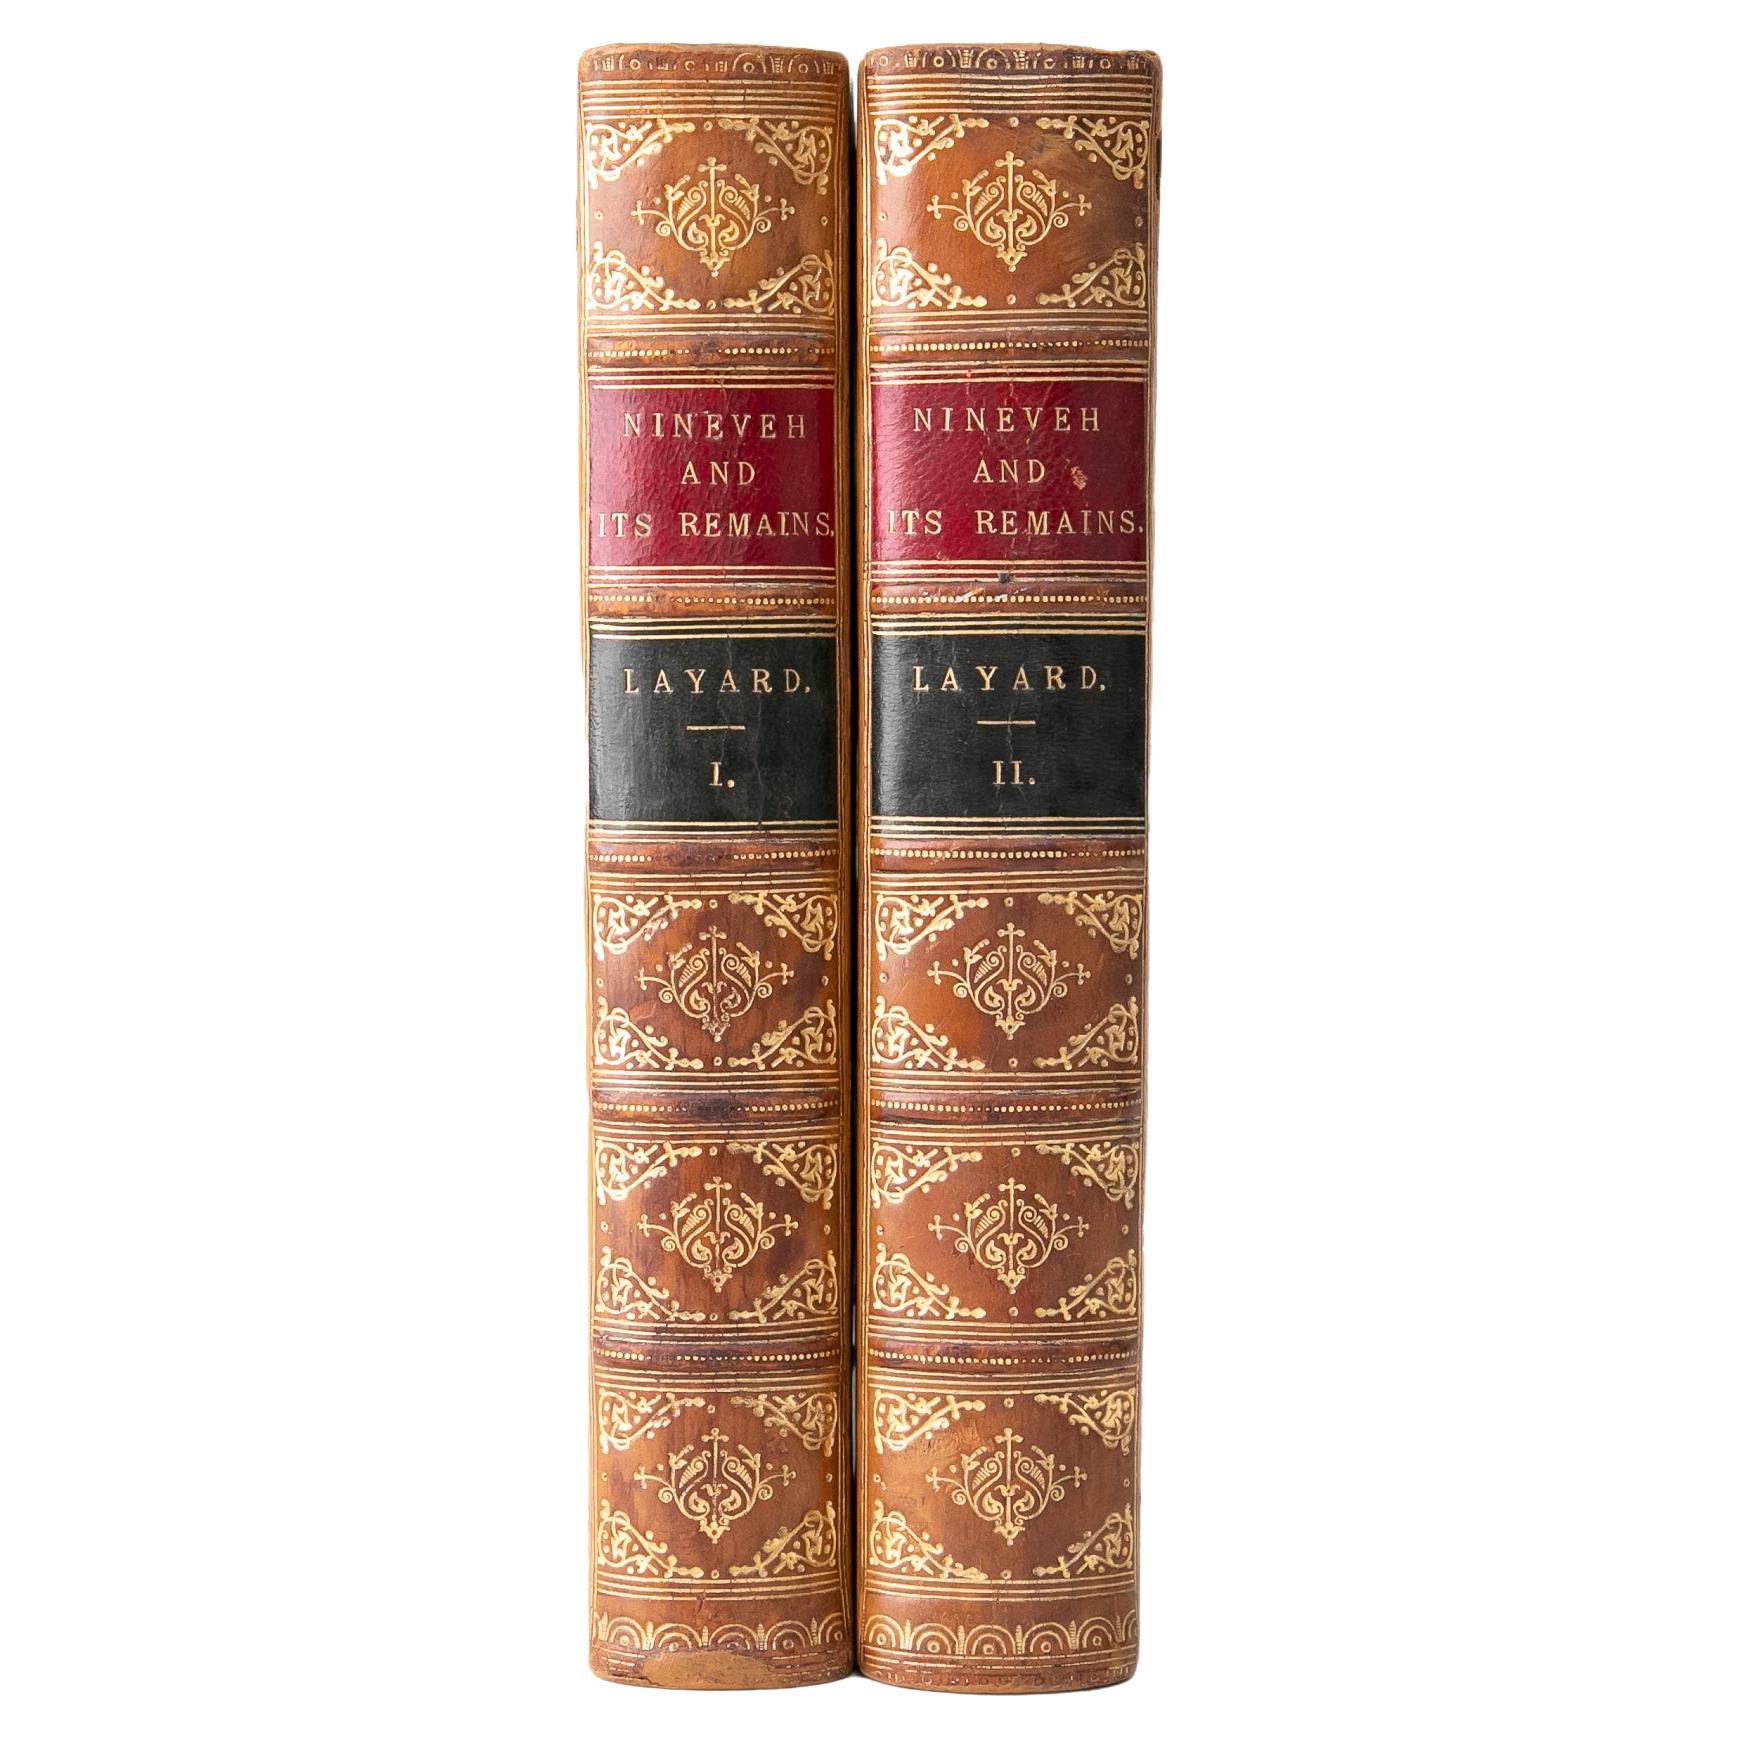 2 Volumes. Austen Henry Layard, Nineveh and its Remains. For Sale